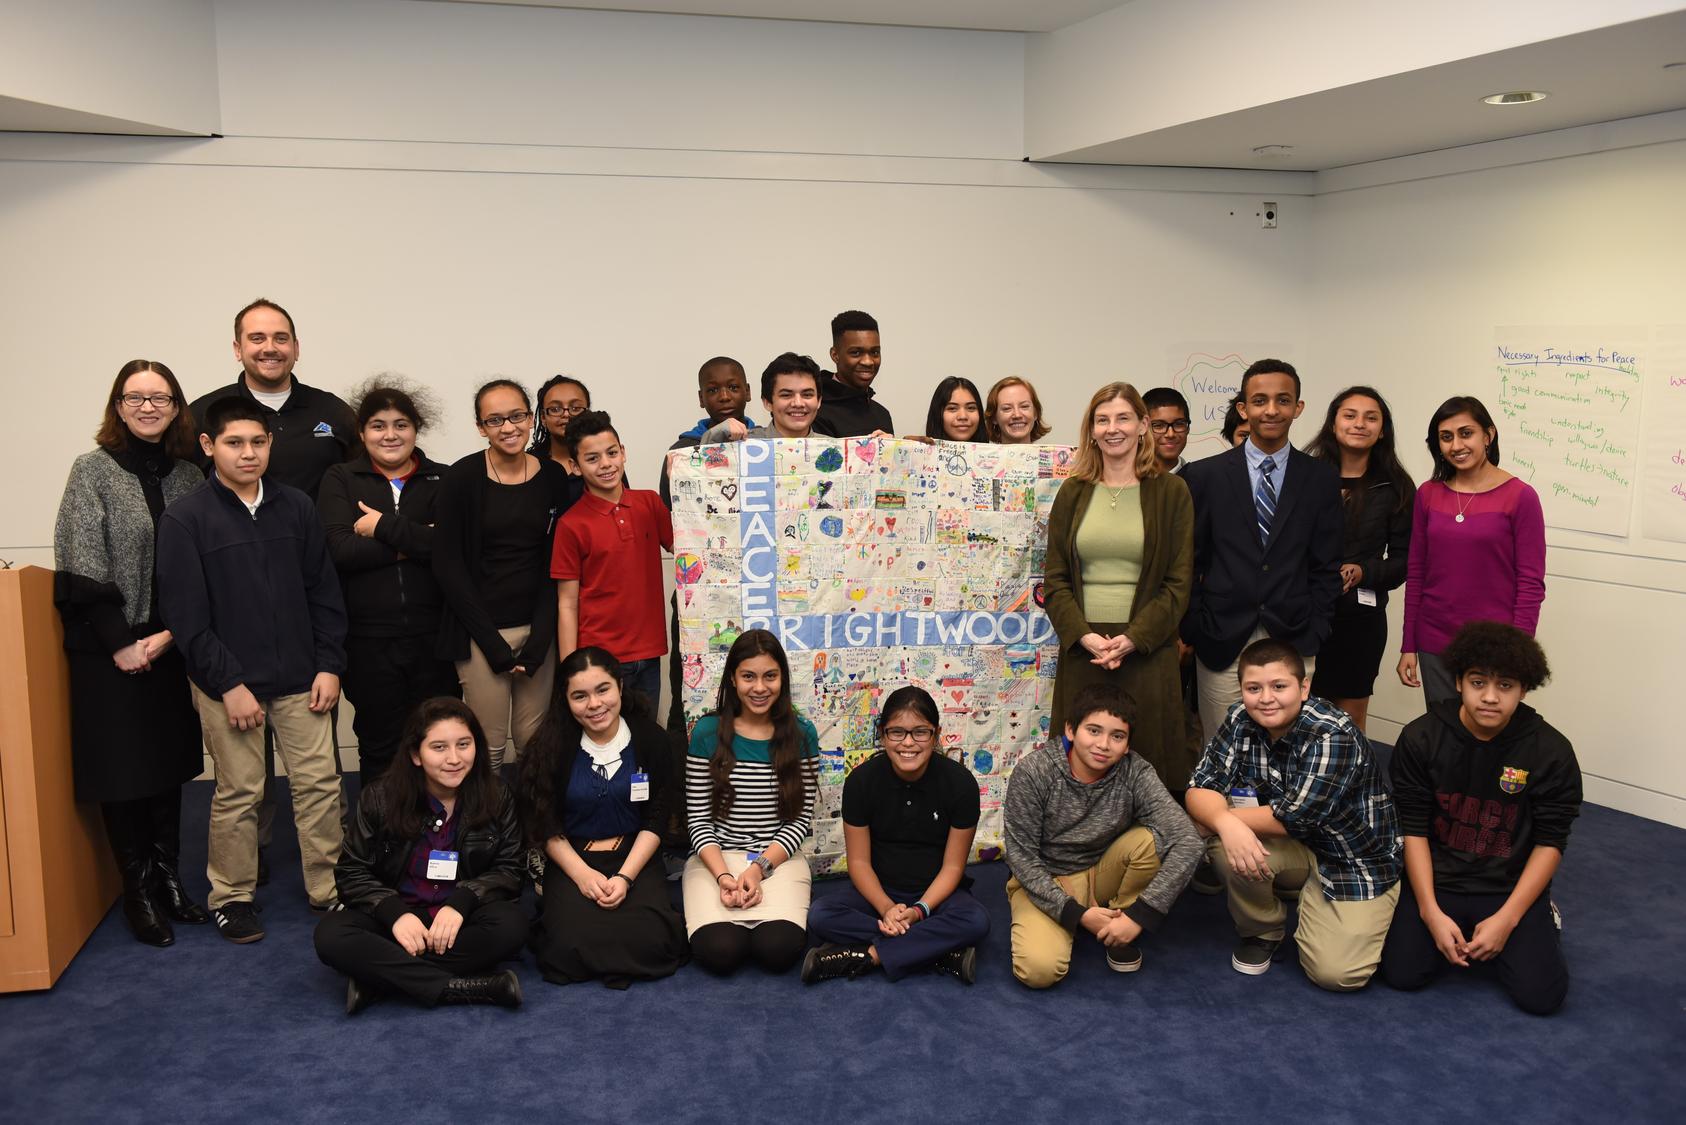 Brightwood Education Campus students, along with Monica Shah and Assistant Principal Justin Ralston, present USIP President Nancy Lindborg with a Peace Quilt following a workshop at USIP.